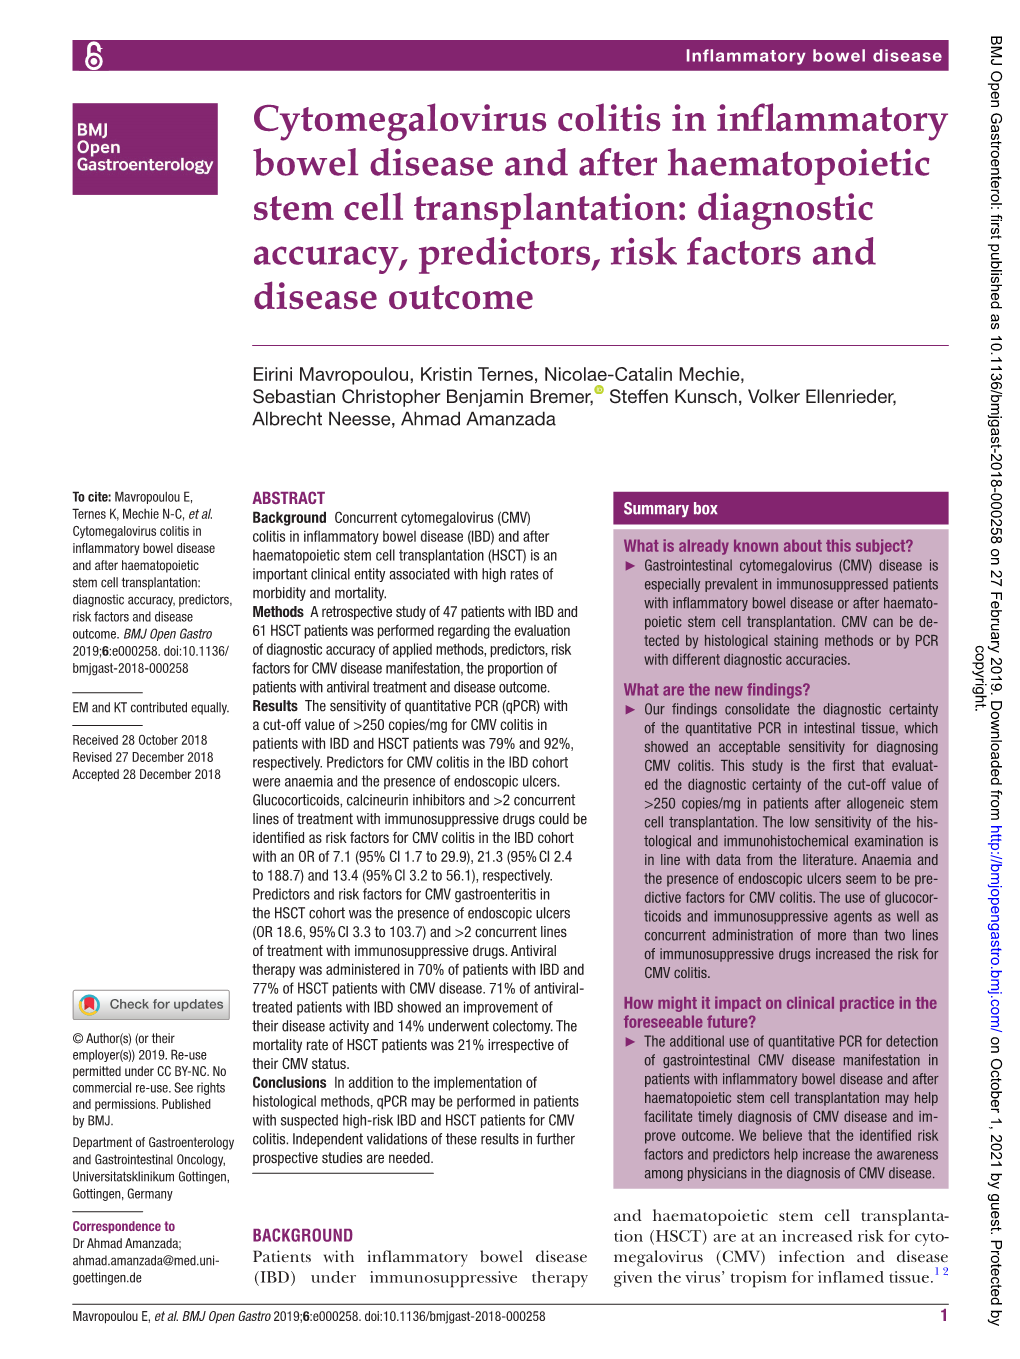 Cytomegalovirus Colitis in Inflammatory Bowel Disease And